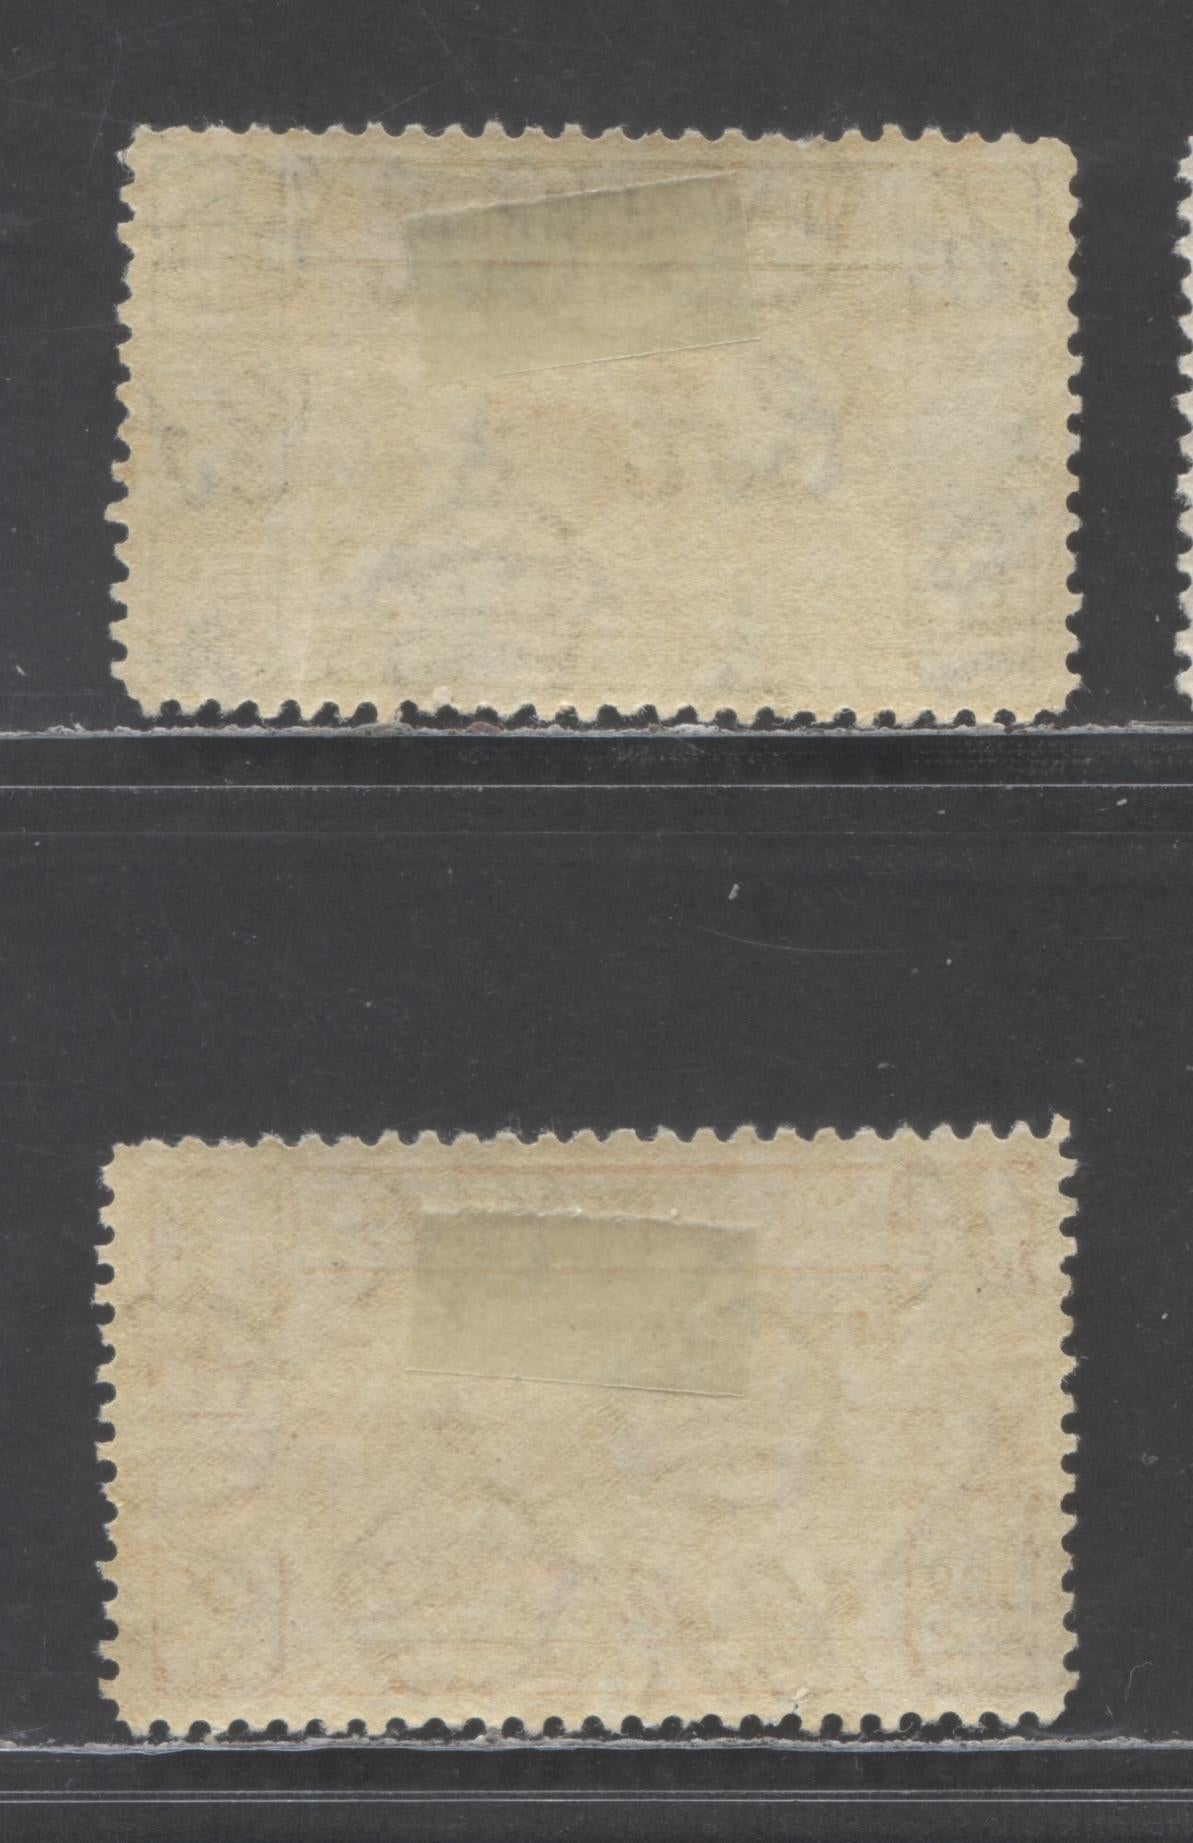 Lot 99 New Hebrides SC#J6-J7 1938 Postage Dues, 2 VFOG Singles, Click on Listing to See ALL Pictures, 2022 Scott Classic Cat. $40